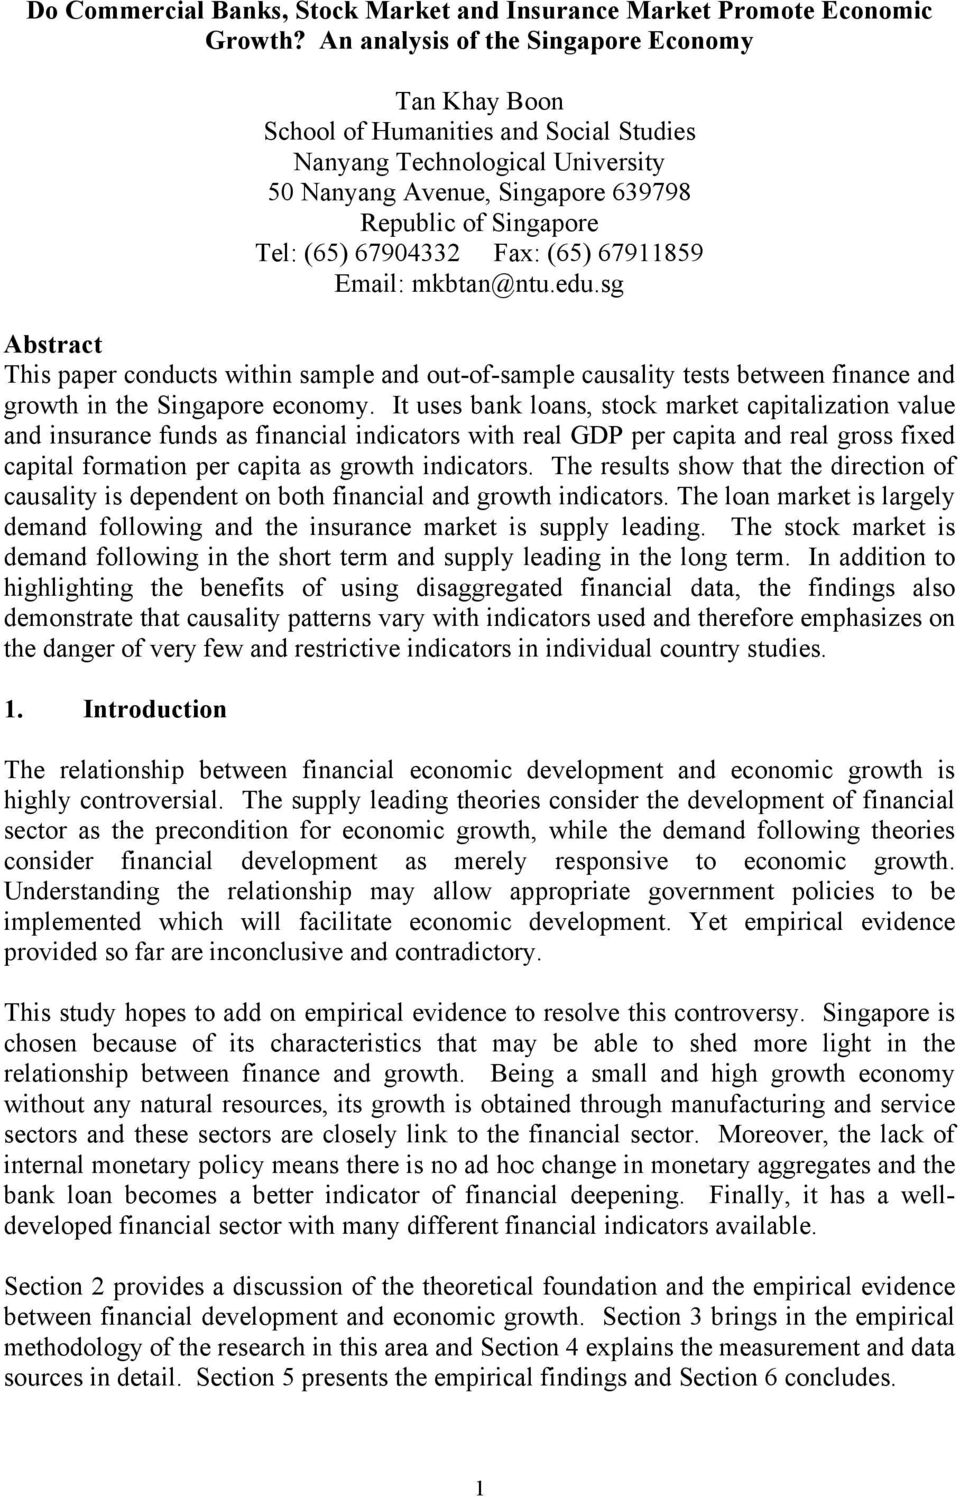 67904332 Fax: (65) 67911859 Email: mkbtan@ntu.edu.sg Abstract This paper conducts within sample and out-of-sample causality tests between finance and growth in the Singapore economy.